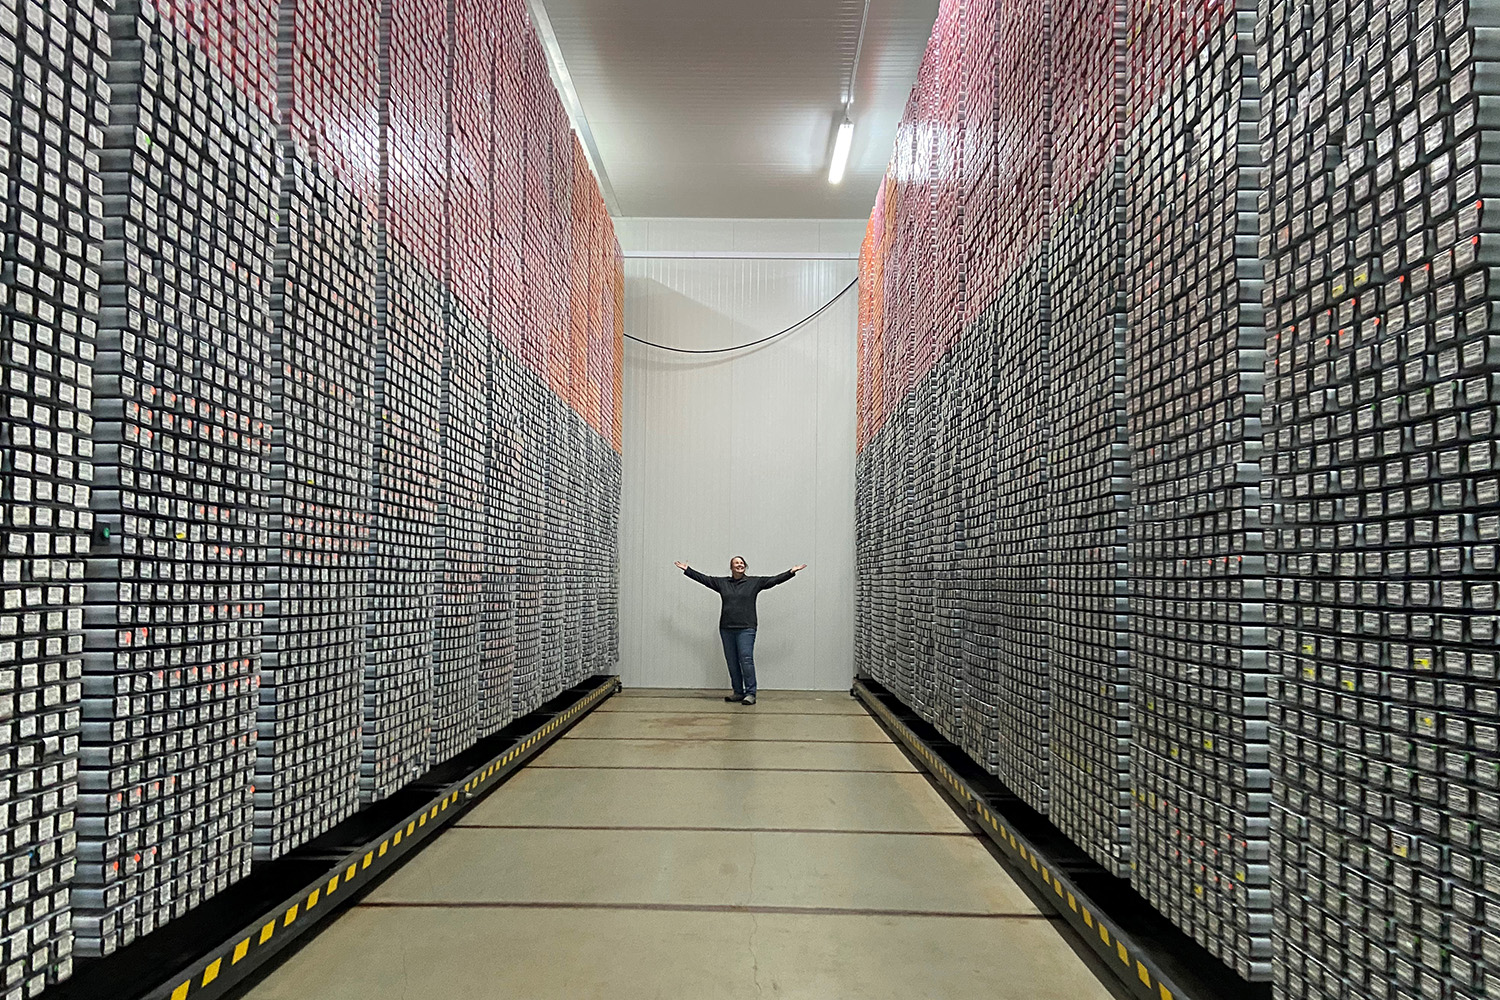 Tracy in one of the bays of the refrigerated core repository